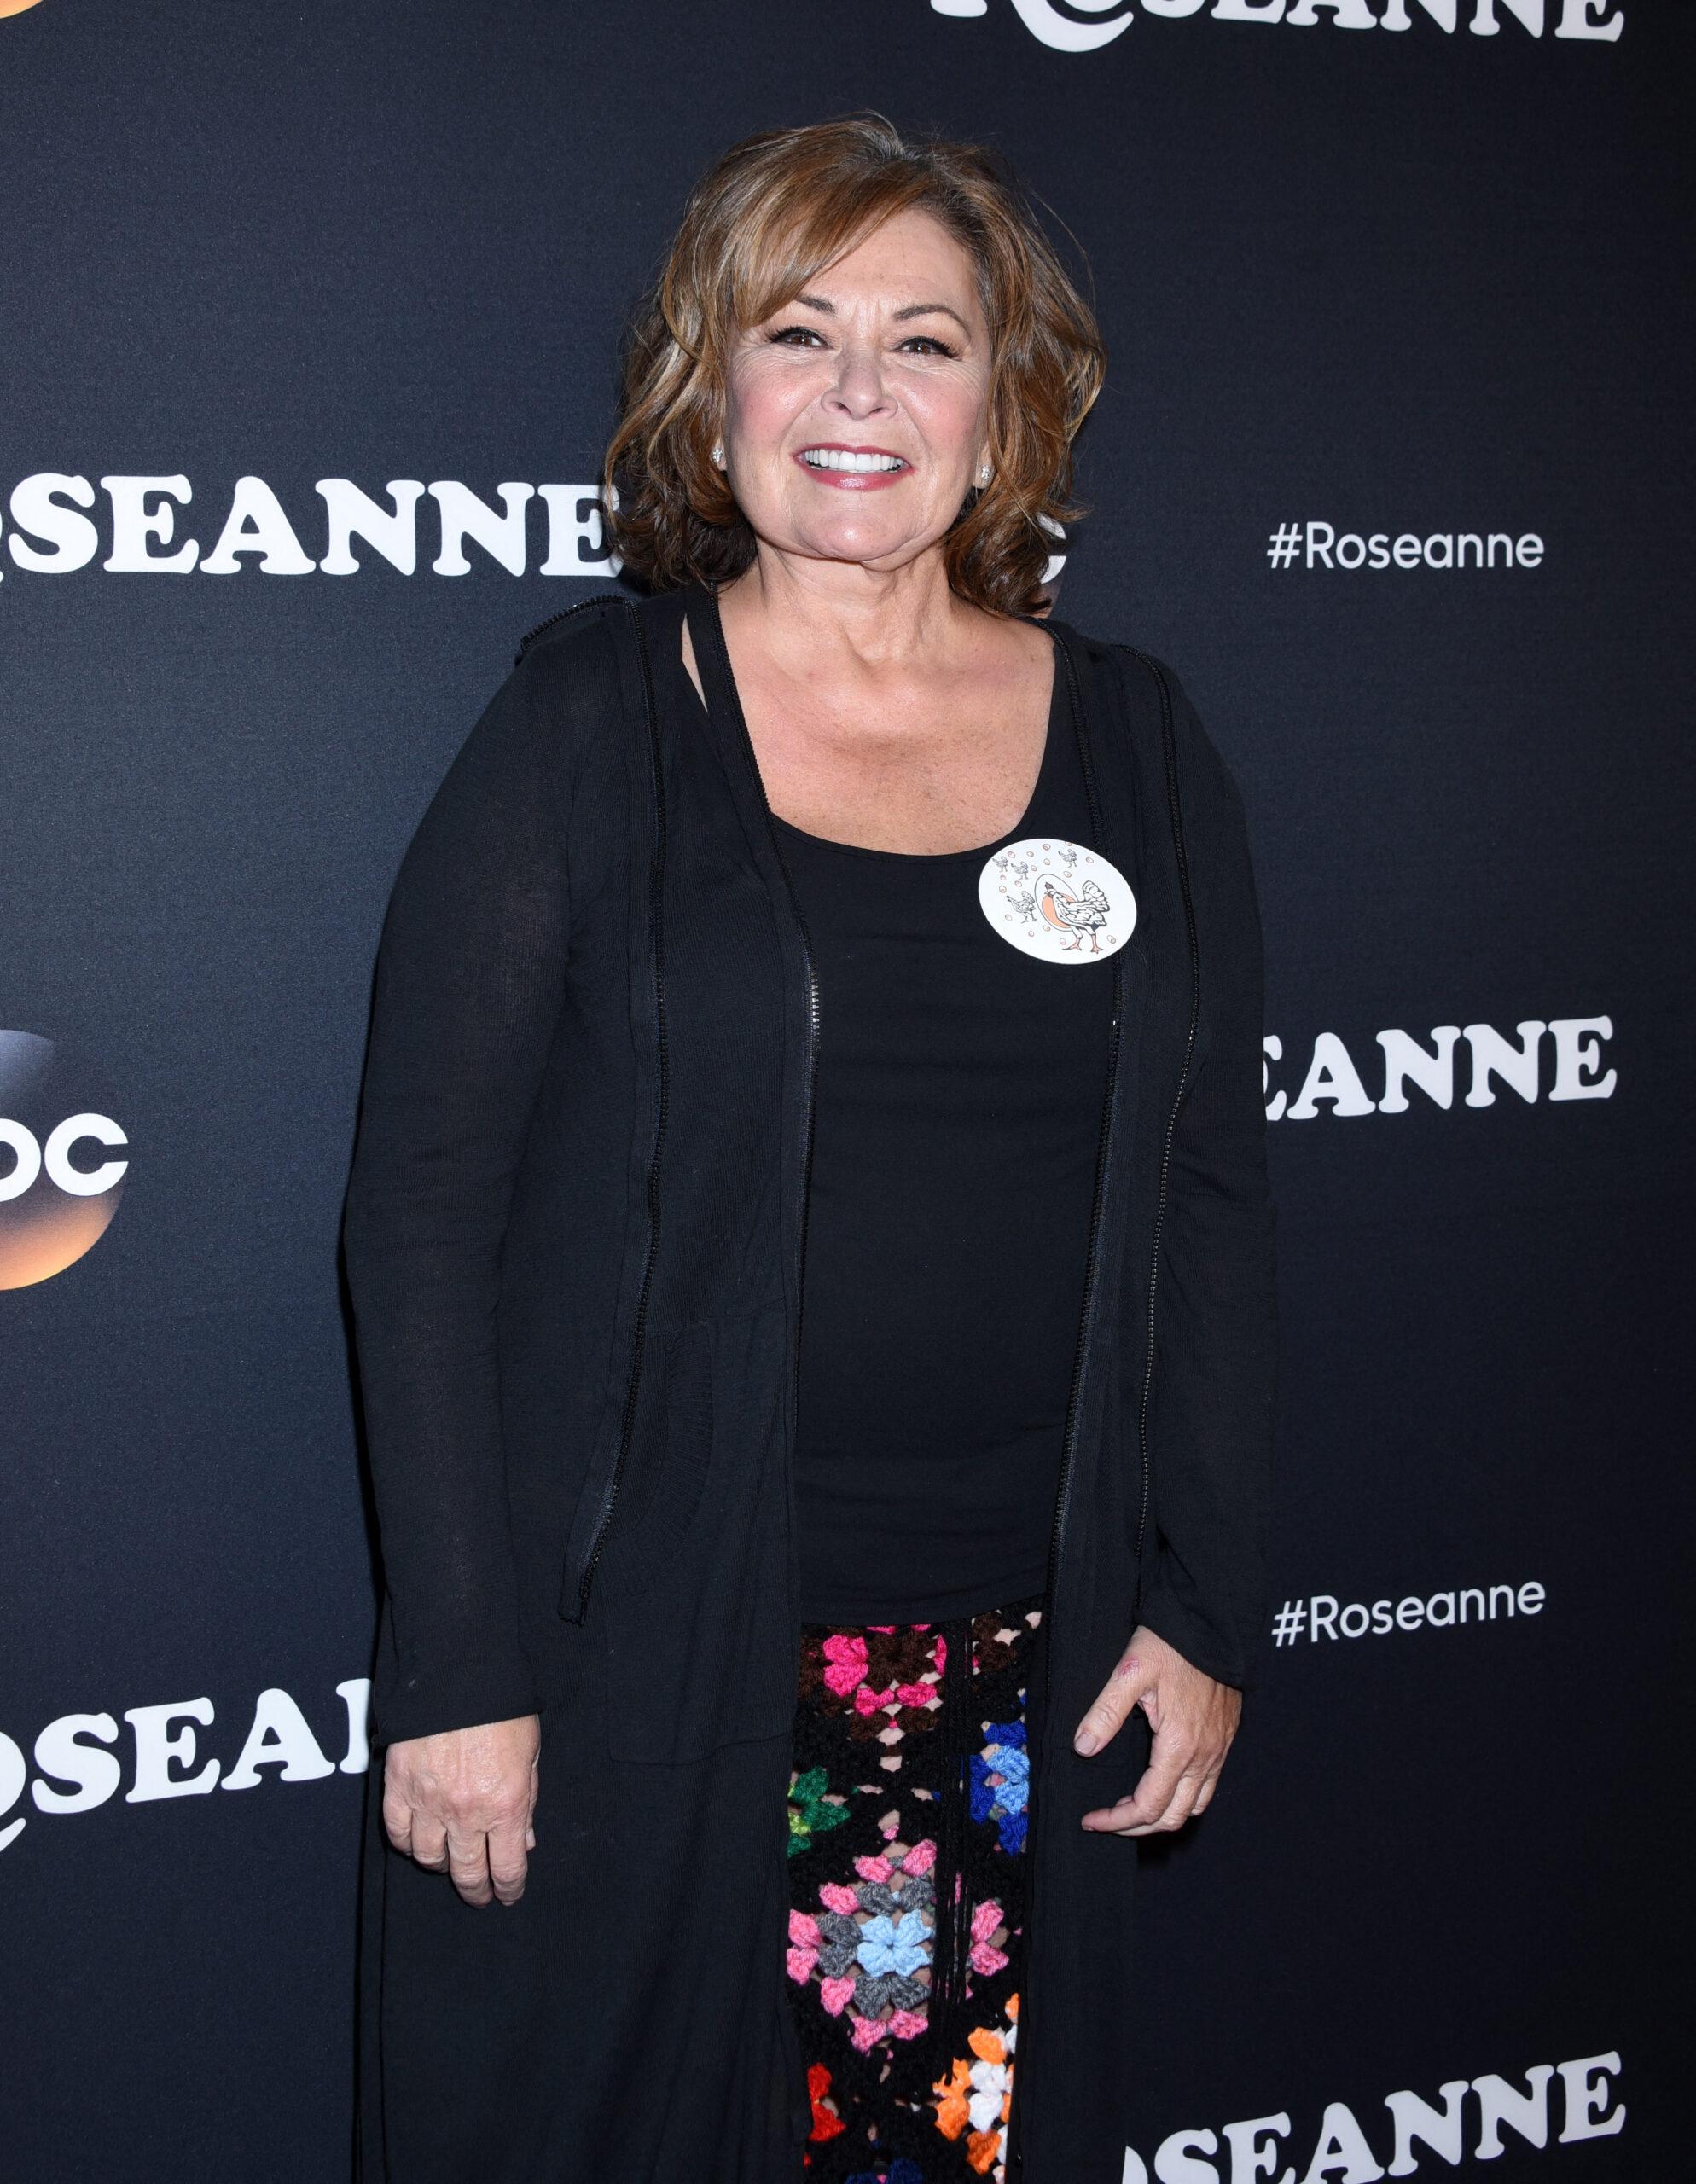 Roseanne Barr’s Ex-husband Claims She ‘Hated’ Donald Trump Before Joining MAGA Movement